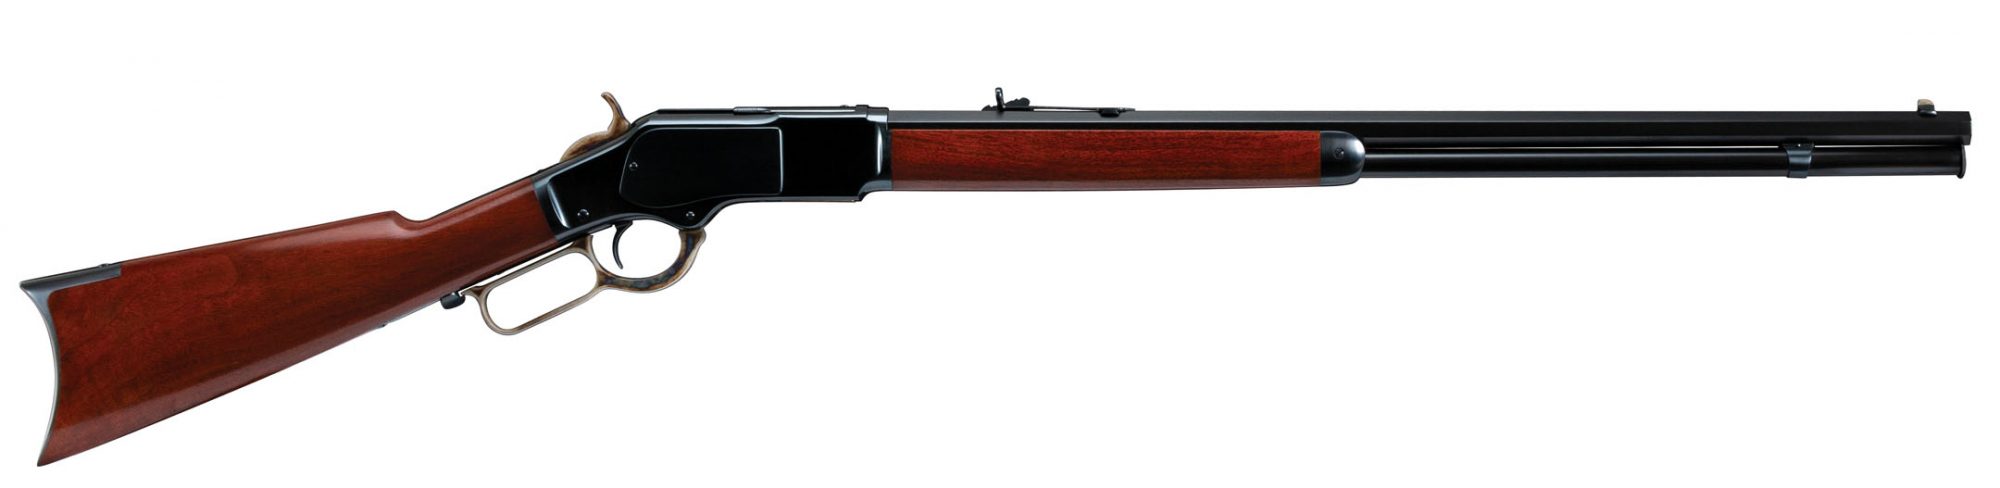 Winchester Model 1873 in .22 Short from 1890, restored by Turnbull Restoration of Bloomfield, NY